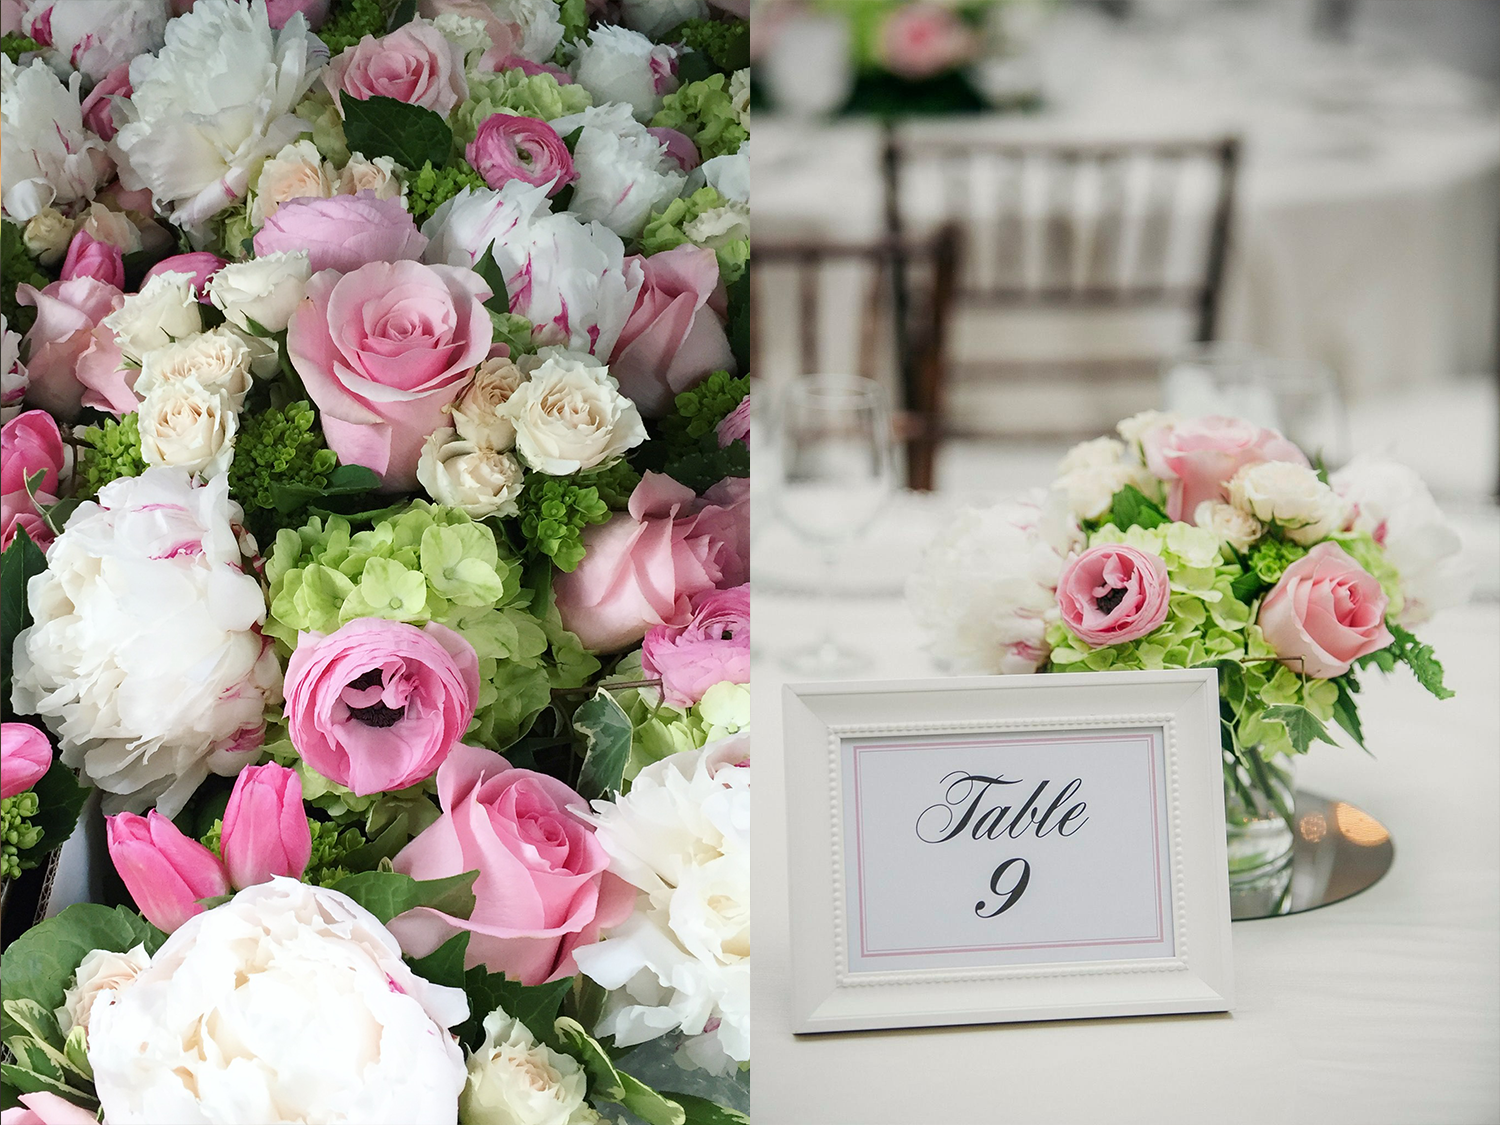 Close up shot of pink, white and green flowers. Floral arrangement in vase on wedding banquet table.